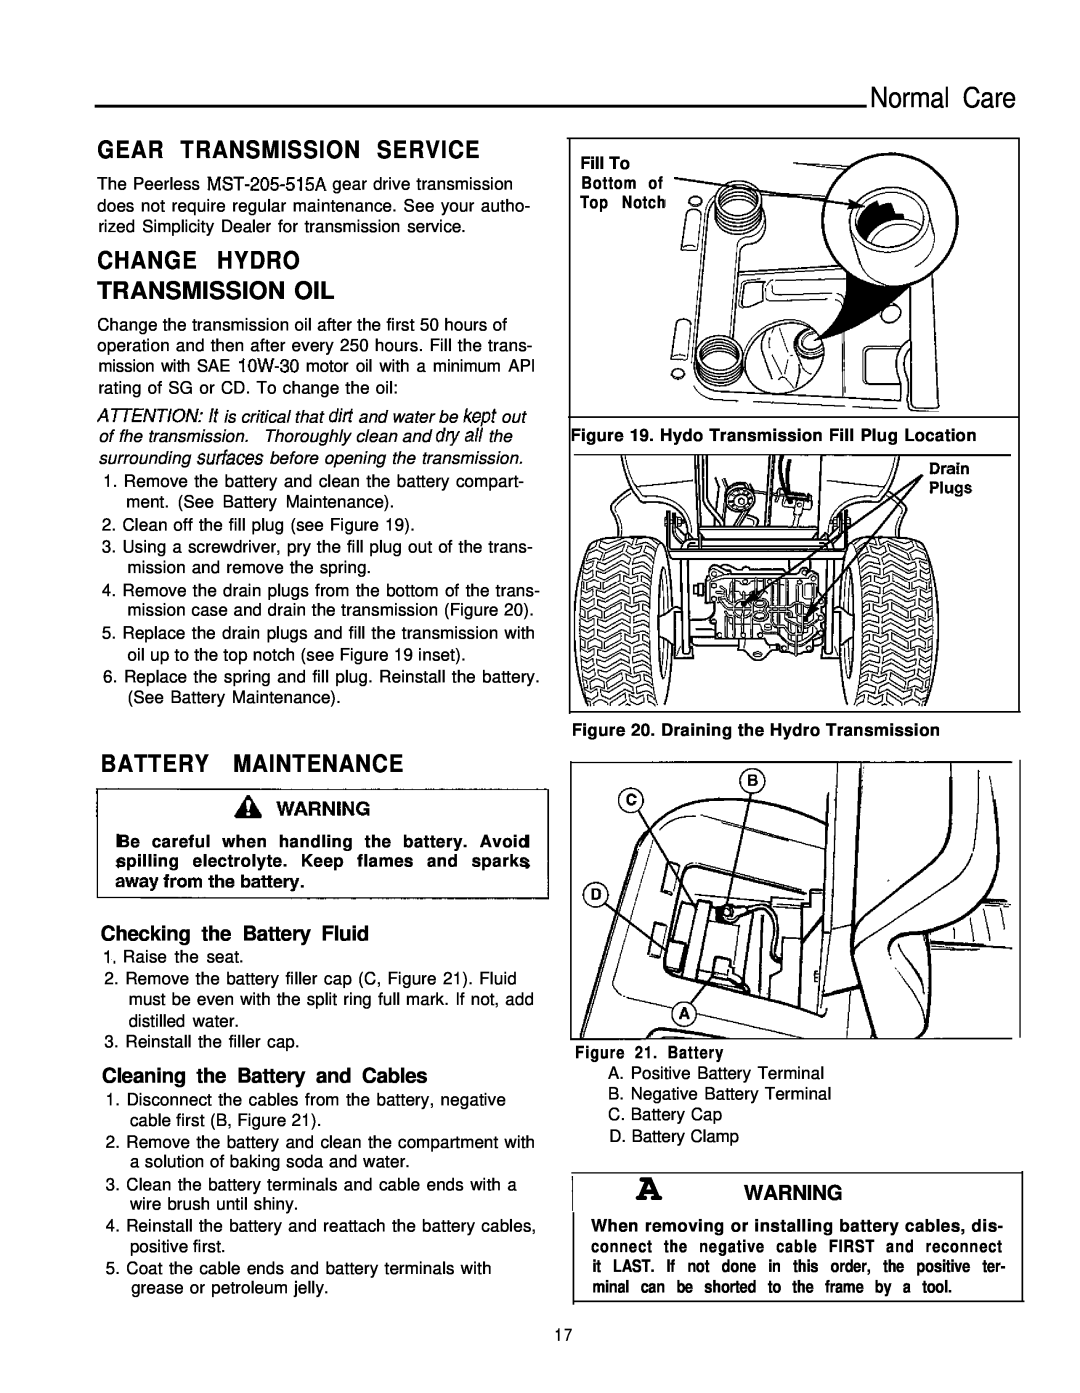 Simplicity 1693264, 1693266 Gear Transmission Service, Change Hydro Transmission Oil, Battery Maintenance, Normal Care 